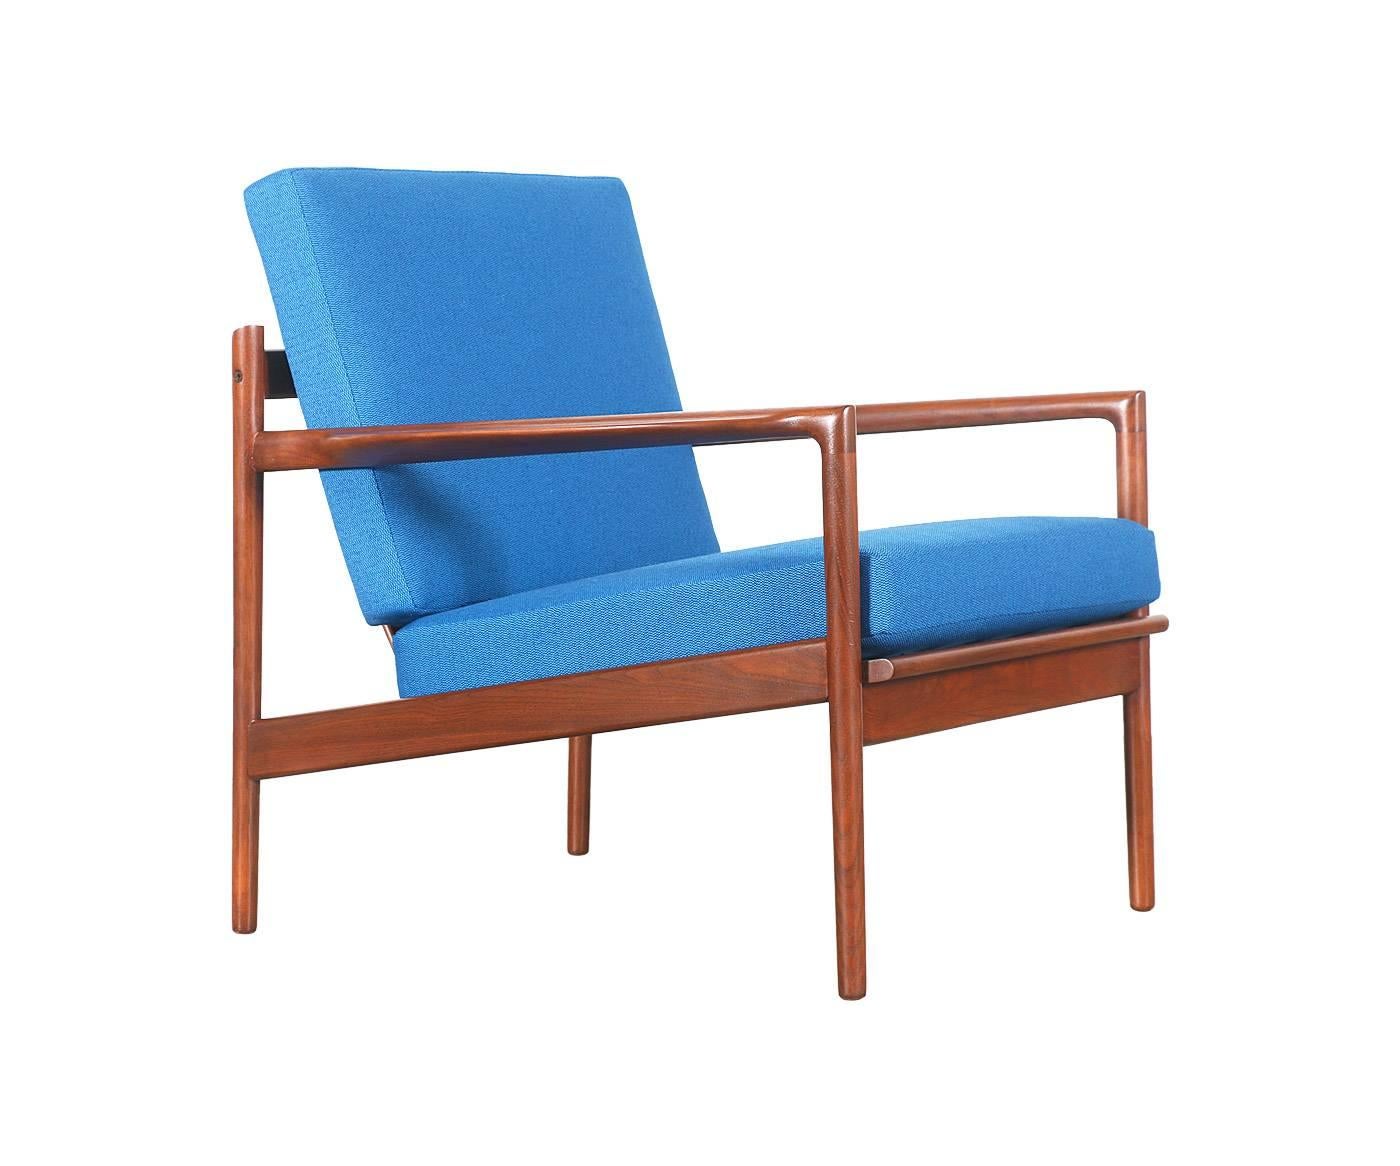 Designer: Ib Kofod-Larsen.
Manufacturer: Selig.
Period/Style: Danish Modern.
Country: Denmark.
Date: 1960s.

Dimensions: 29.5″ H x 30″ L x 29″ W.
Seat height 16.25″.
Materials: Walnut, cotton tweed.
Condition: Excellent, newly refinished